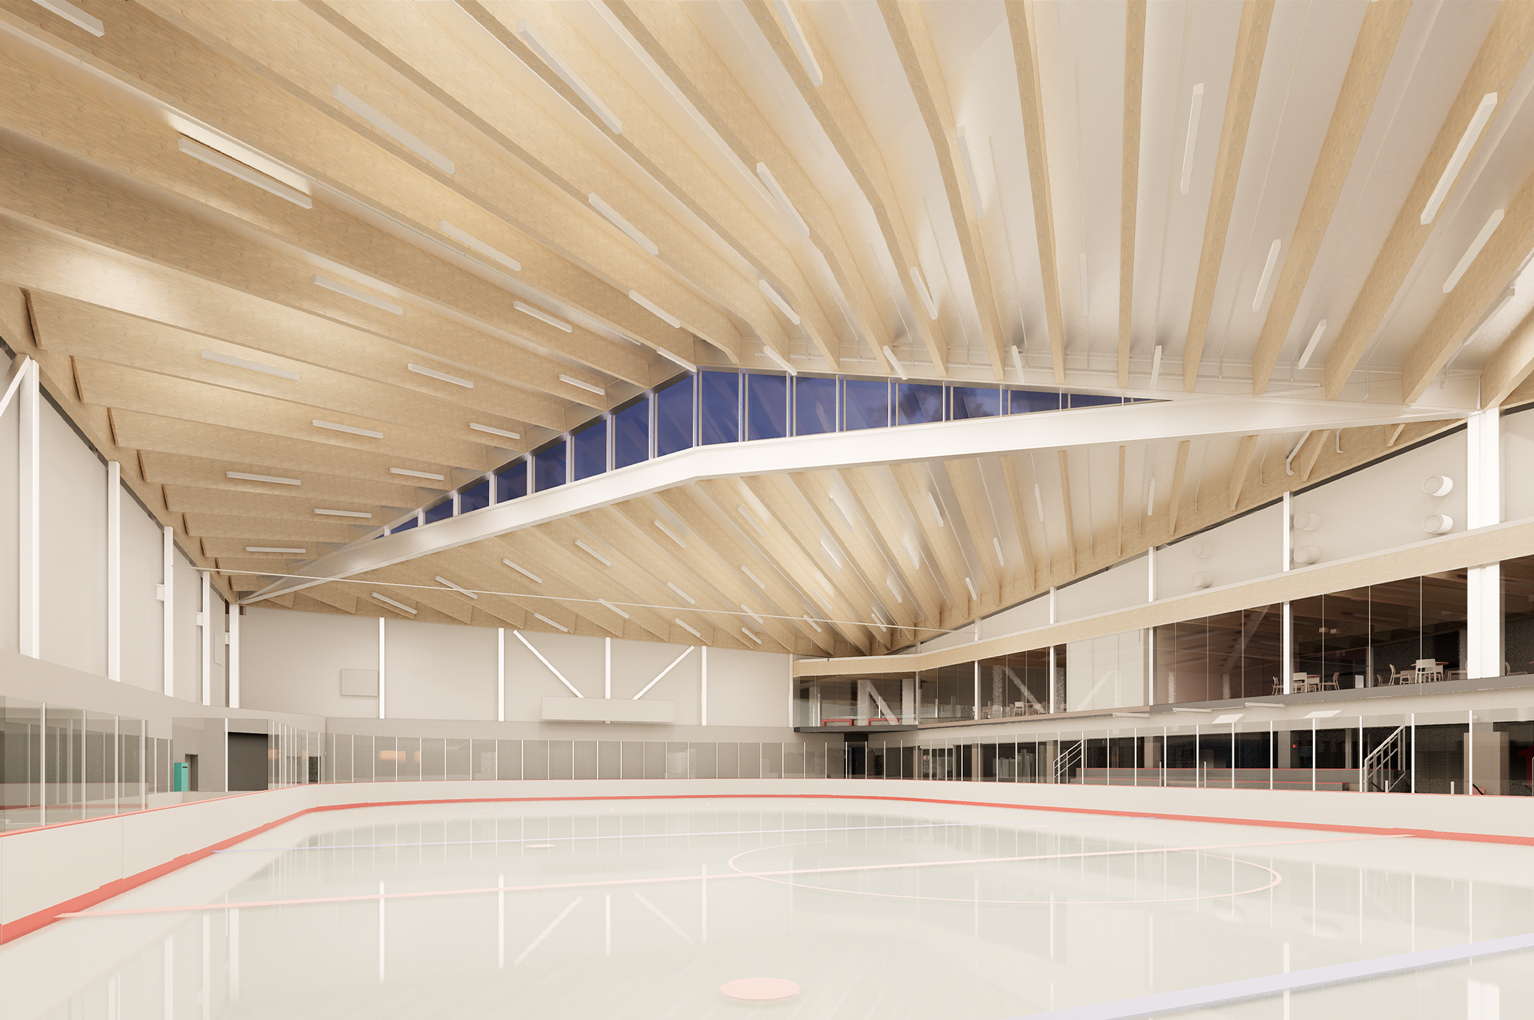 Ice rink with a geometric ceiling that has wooden beams along it.